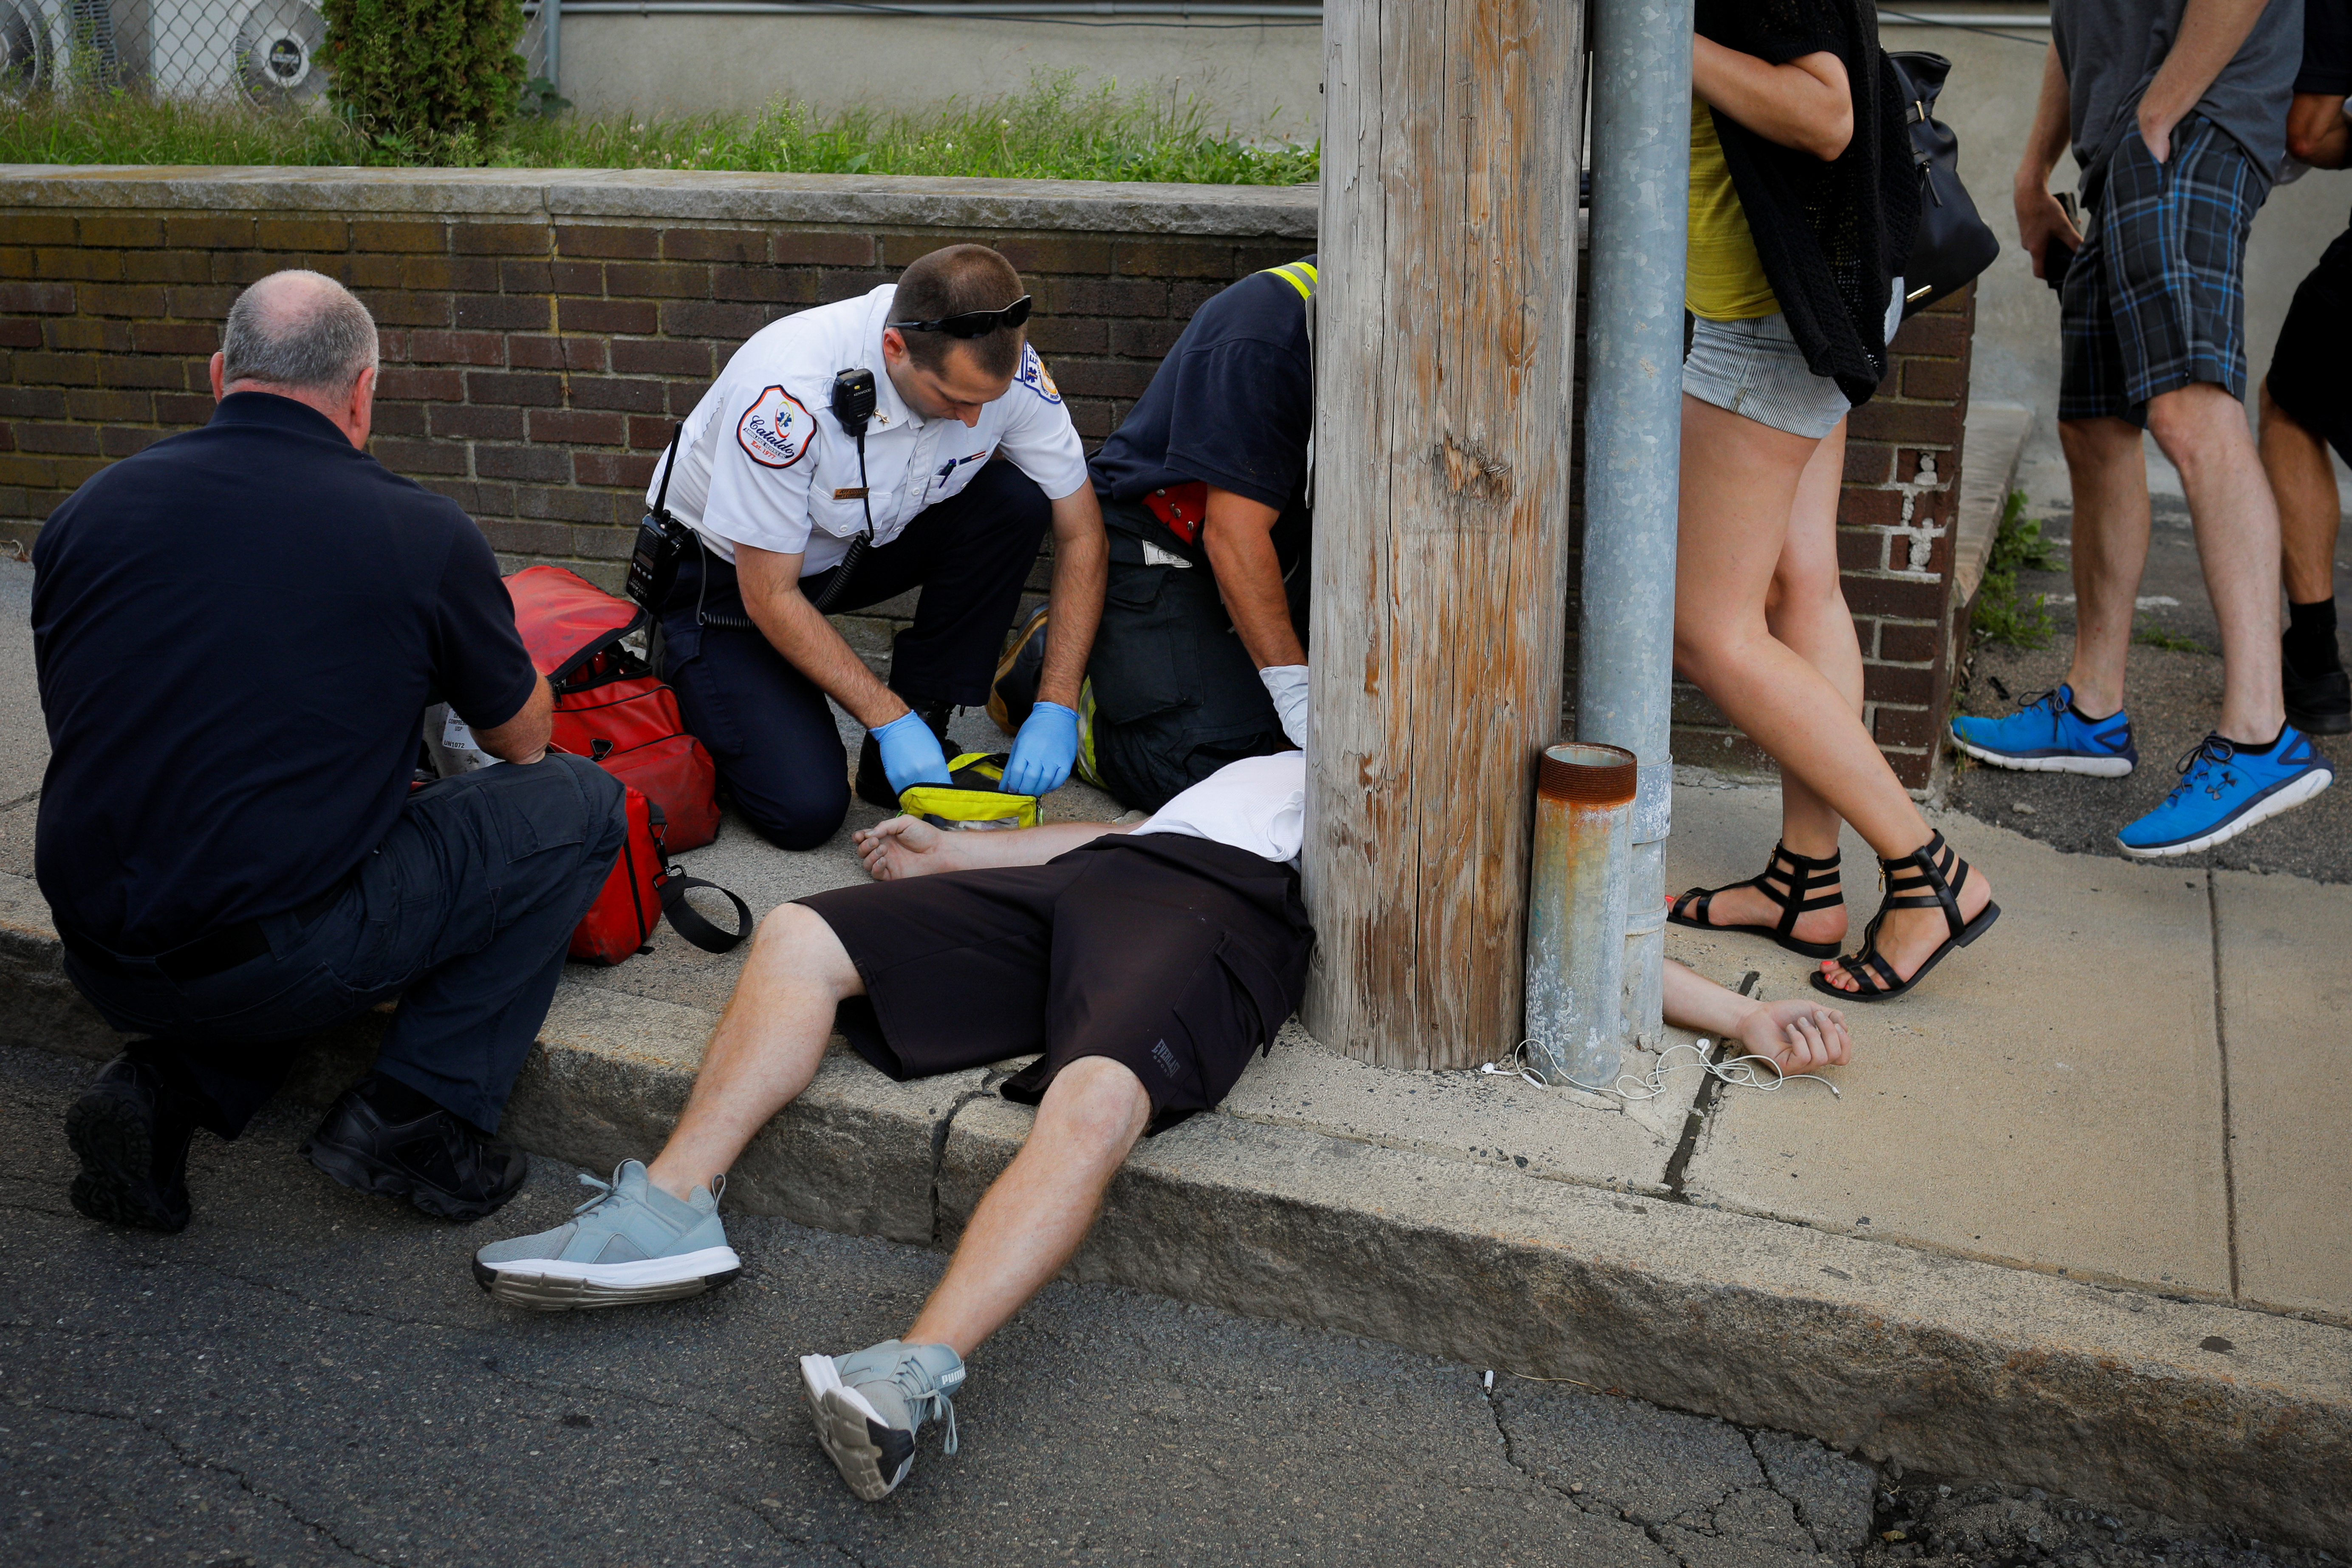 Cataldo Ambulance medics and other first responders revive a 32-year-old man who was found unresponsive and not breathing after an opioid overdose on a sidewalk in the Boston suburb of Everett, Massachusetts. (REUTERS/Brian Snyder)